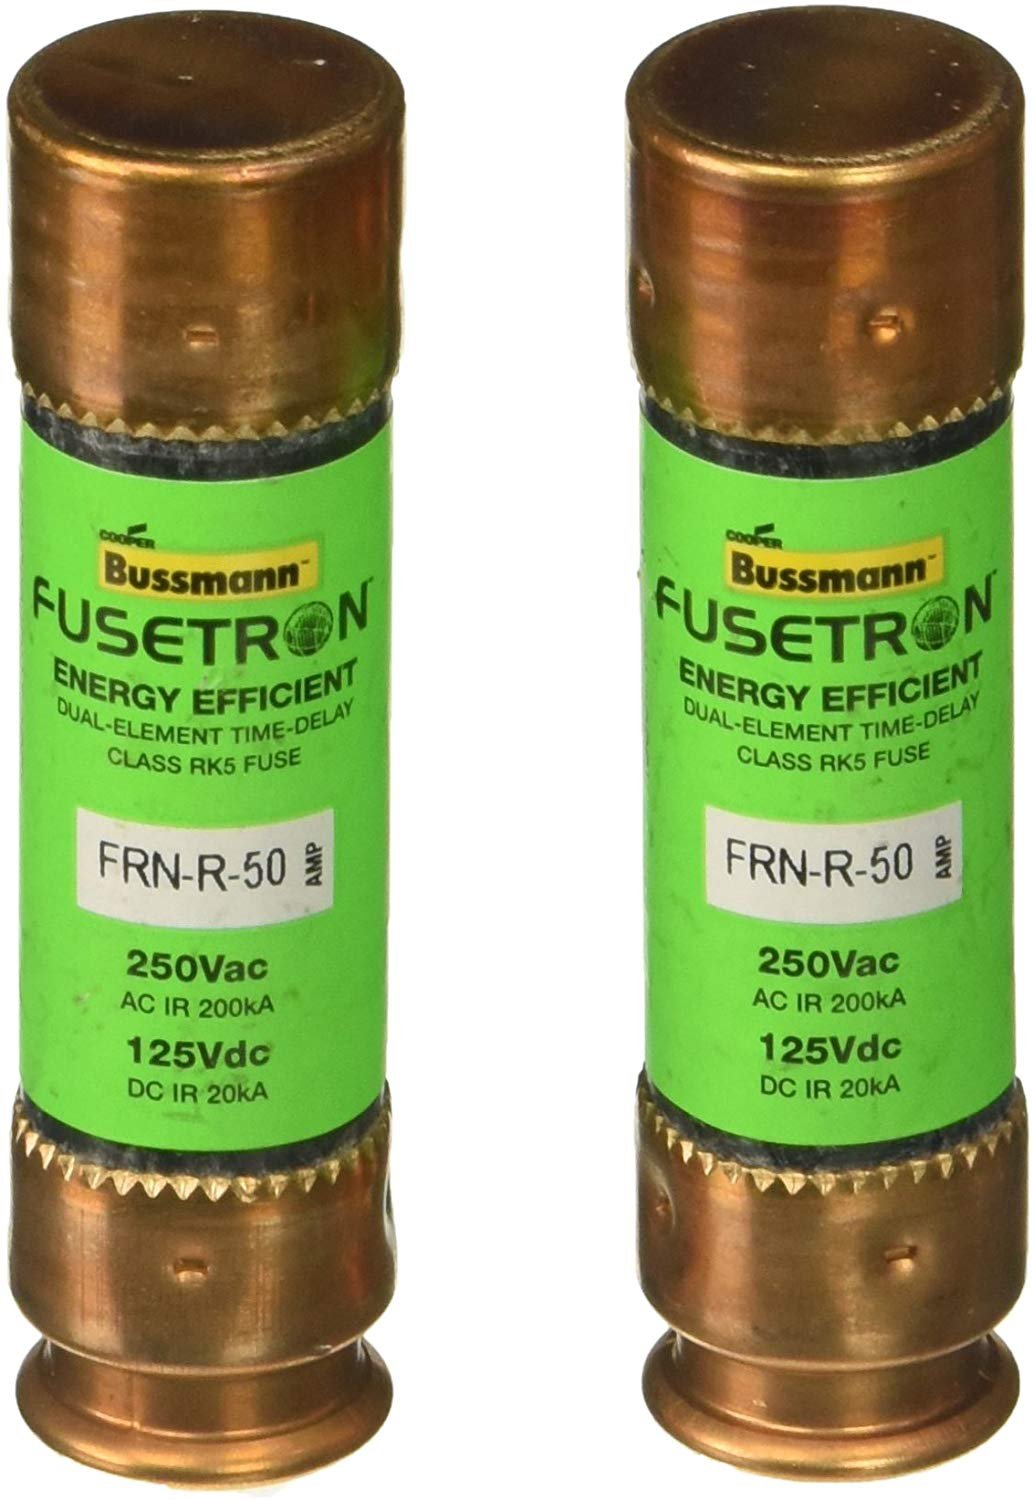 Bussmann BP/FRN-R-50 50 Amp Fusetron Dual Element Time-Delay Current  Limiting Class RK5 Fuse, 250V Carded UL Listed, 2-Pack